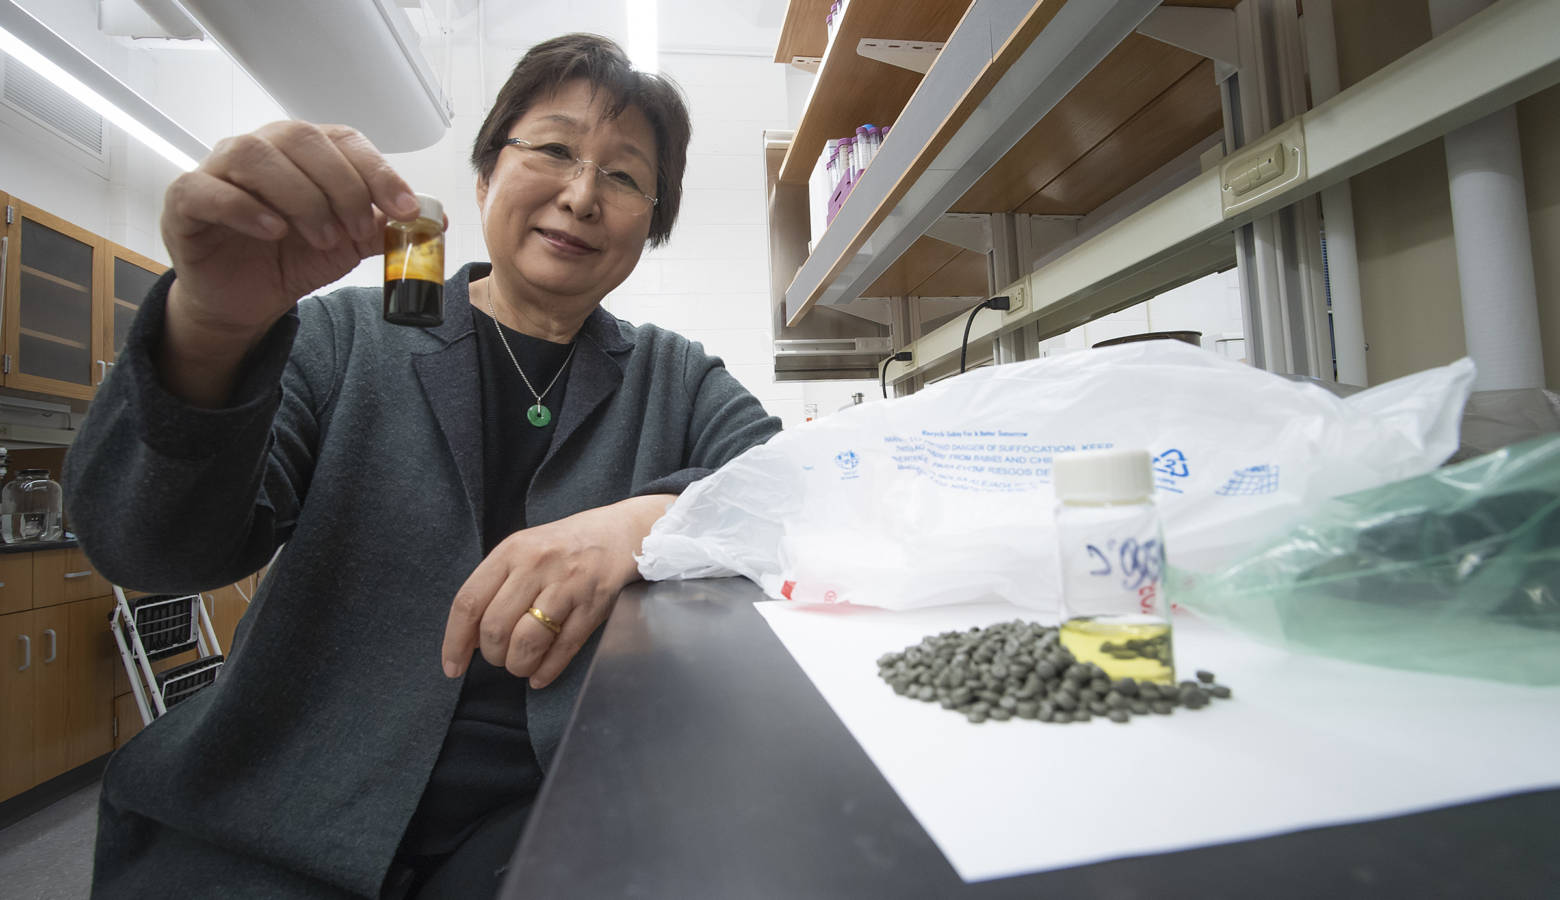 Before the polyolefin plastics can get dissolved in the supercritical water, they're first turned into pellets like the ones in the bottle Linda Wang is holding (Purdue Research Foundation/Vincent Walter)